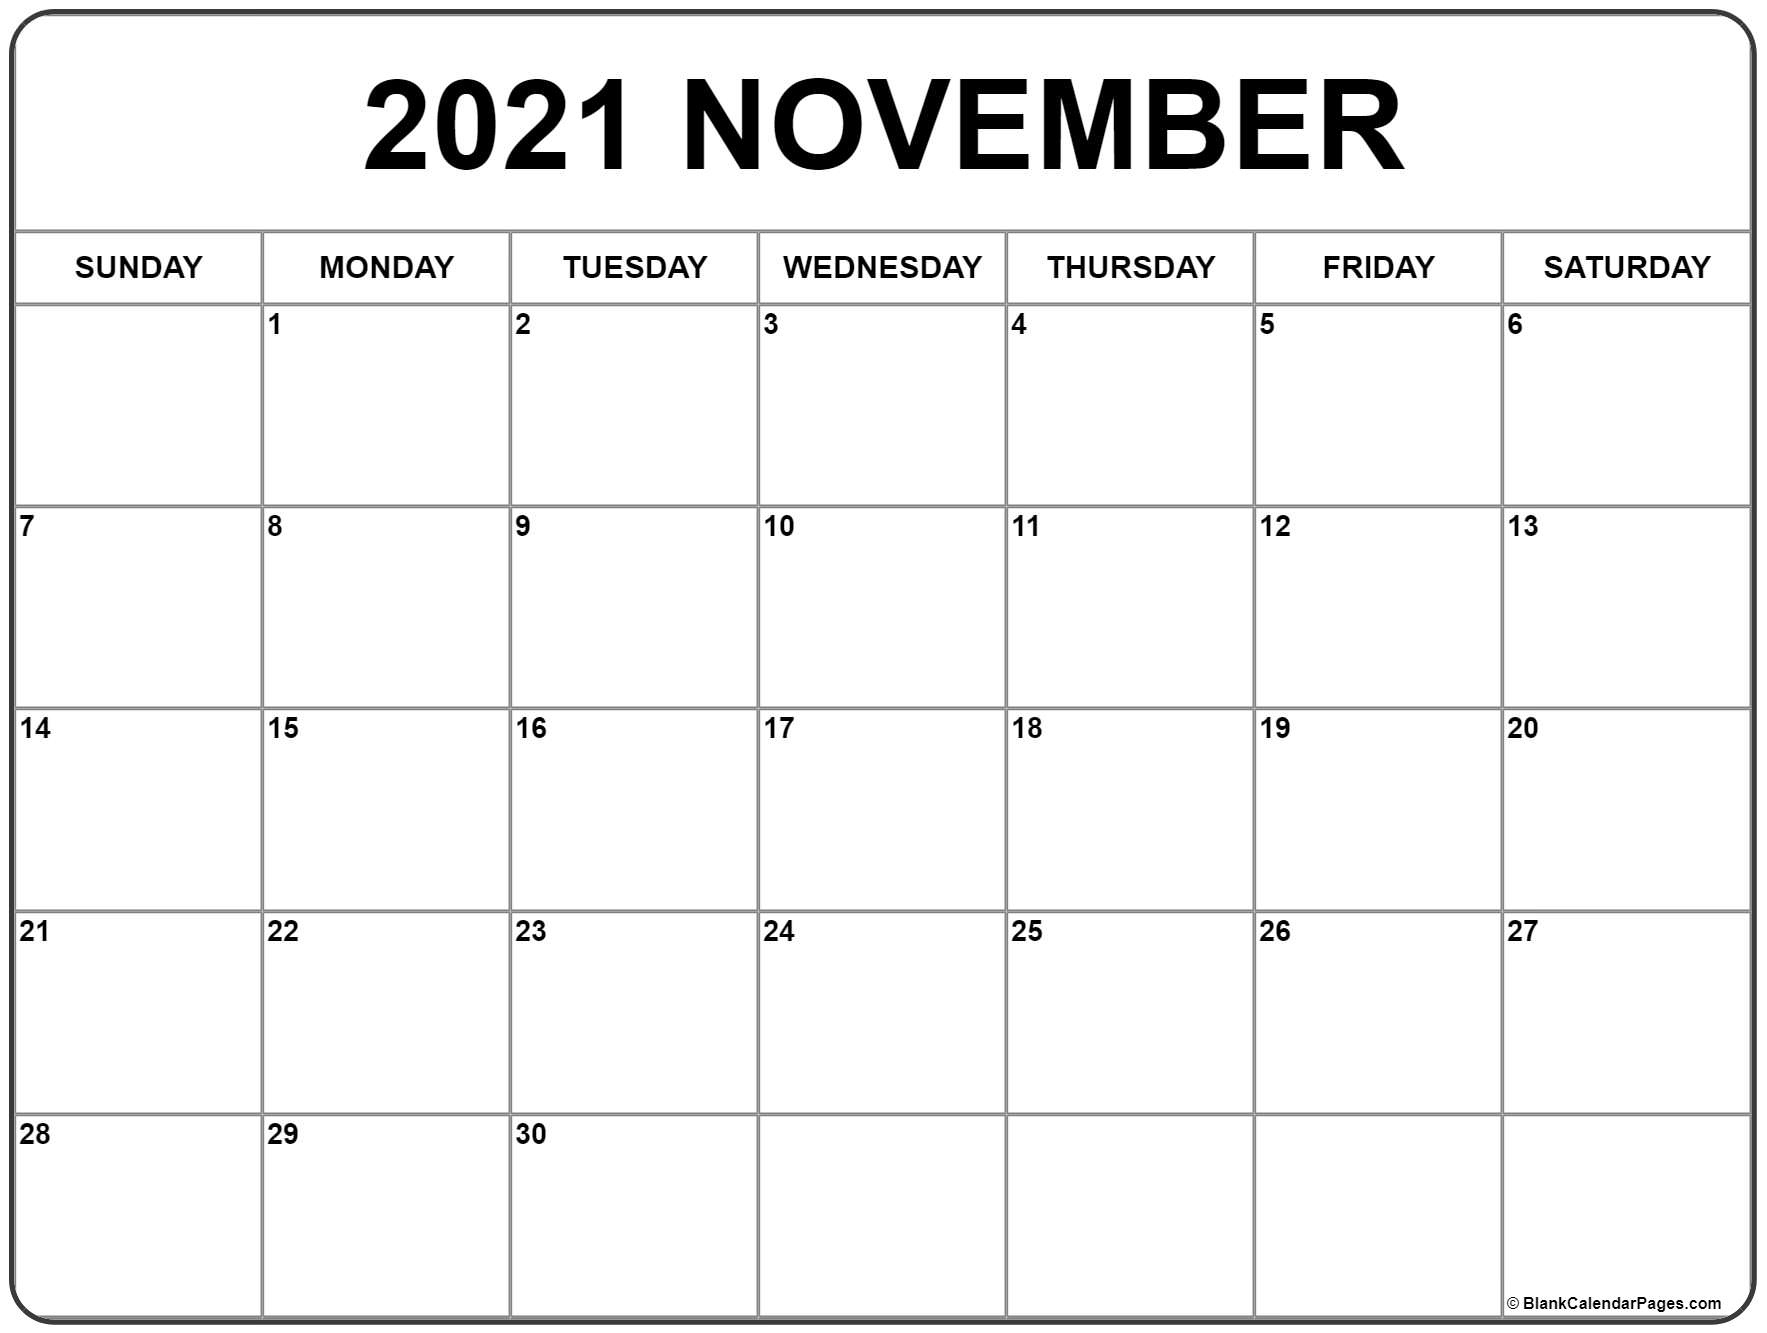 Free 2021 Calendar Monthly With Lines Printable Pdf | Ten Free Printable Calendar 2020-2021 November 2021 In Hijri Calendar